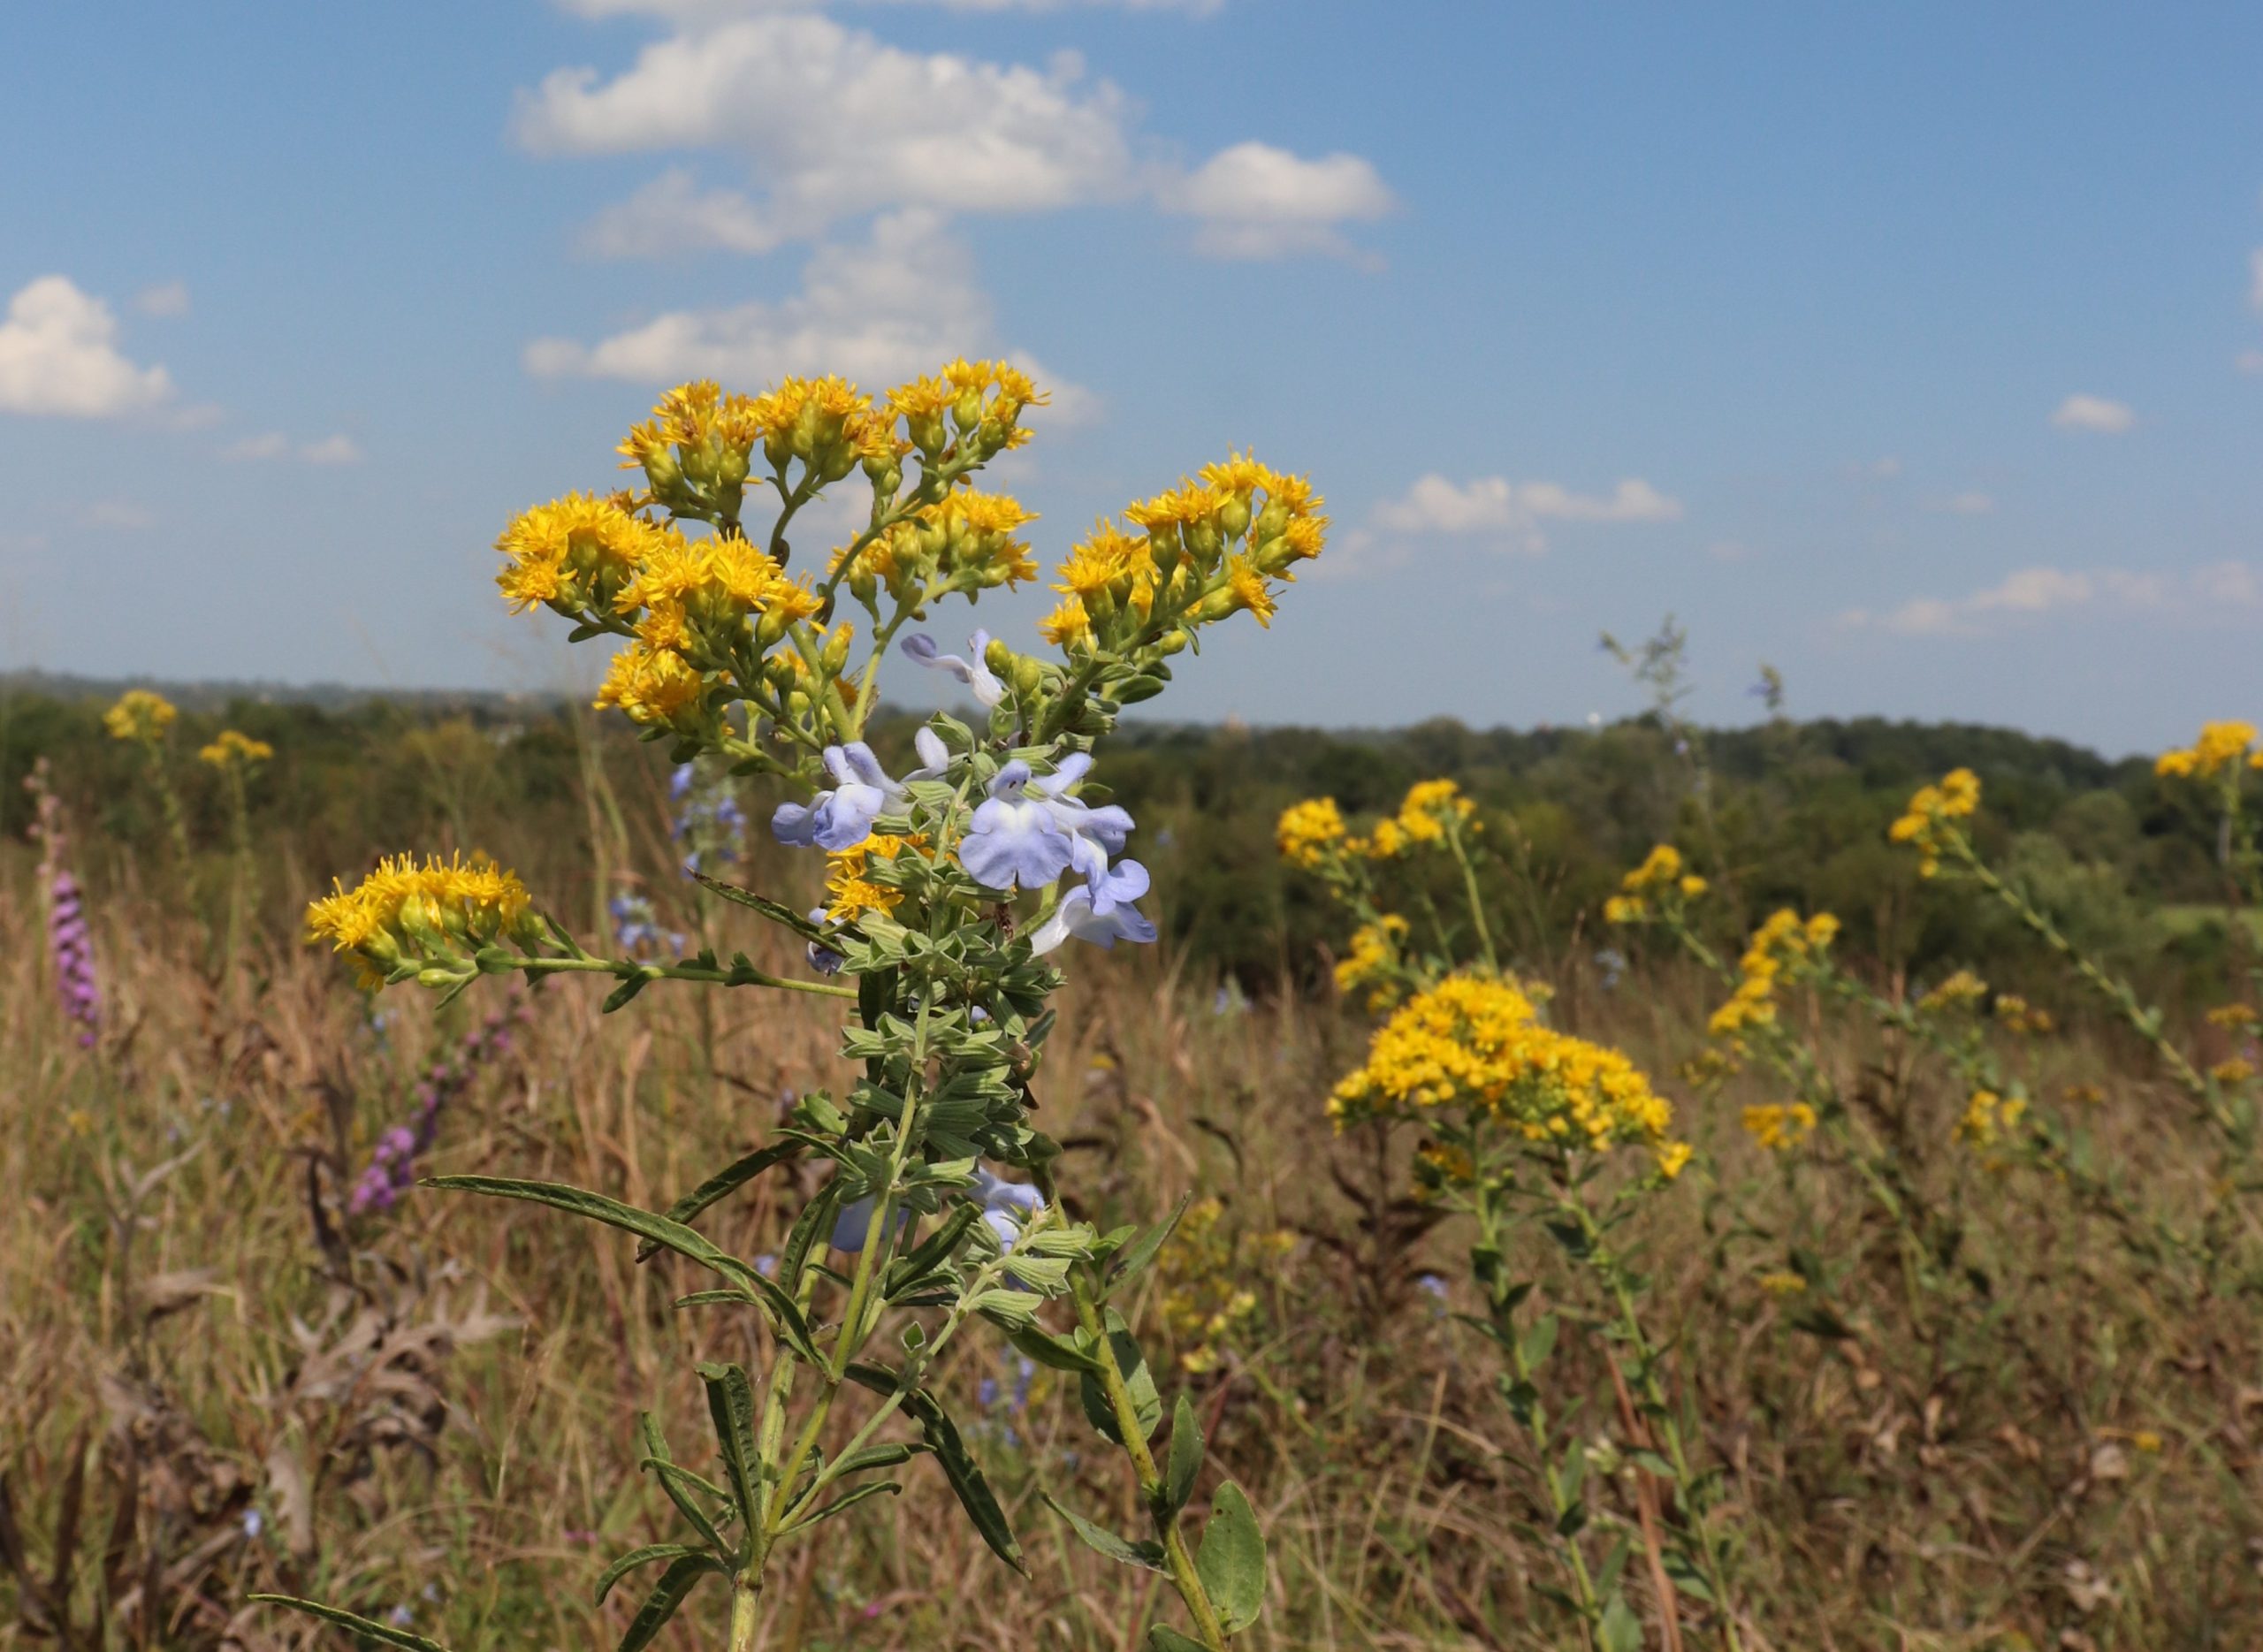 Yellow and blue flowers in the foreground of a prairie during the fall season